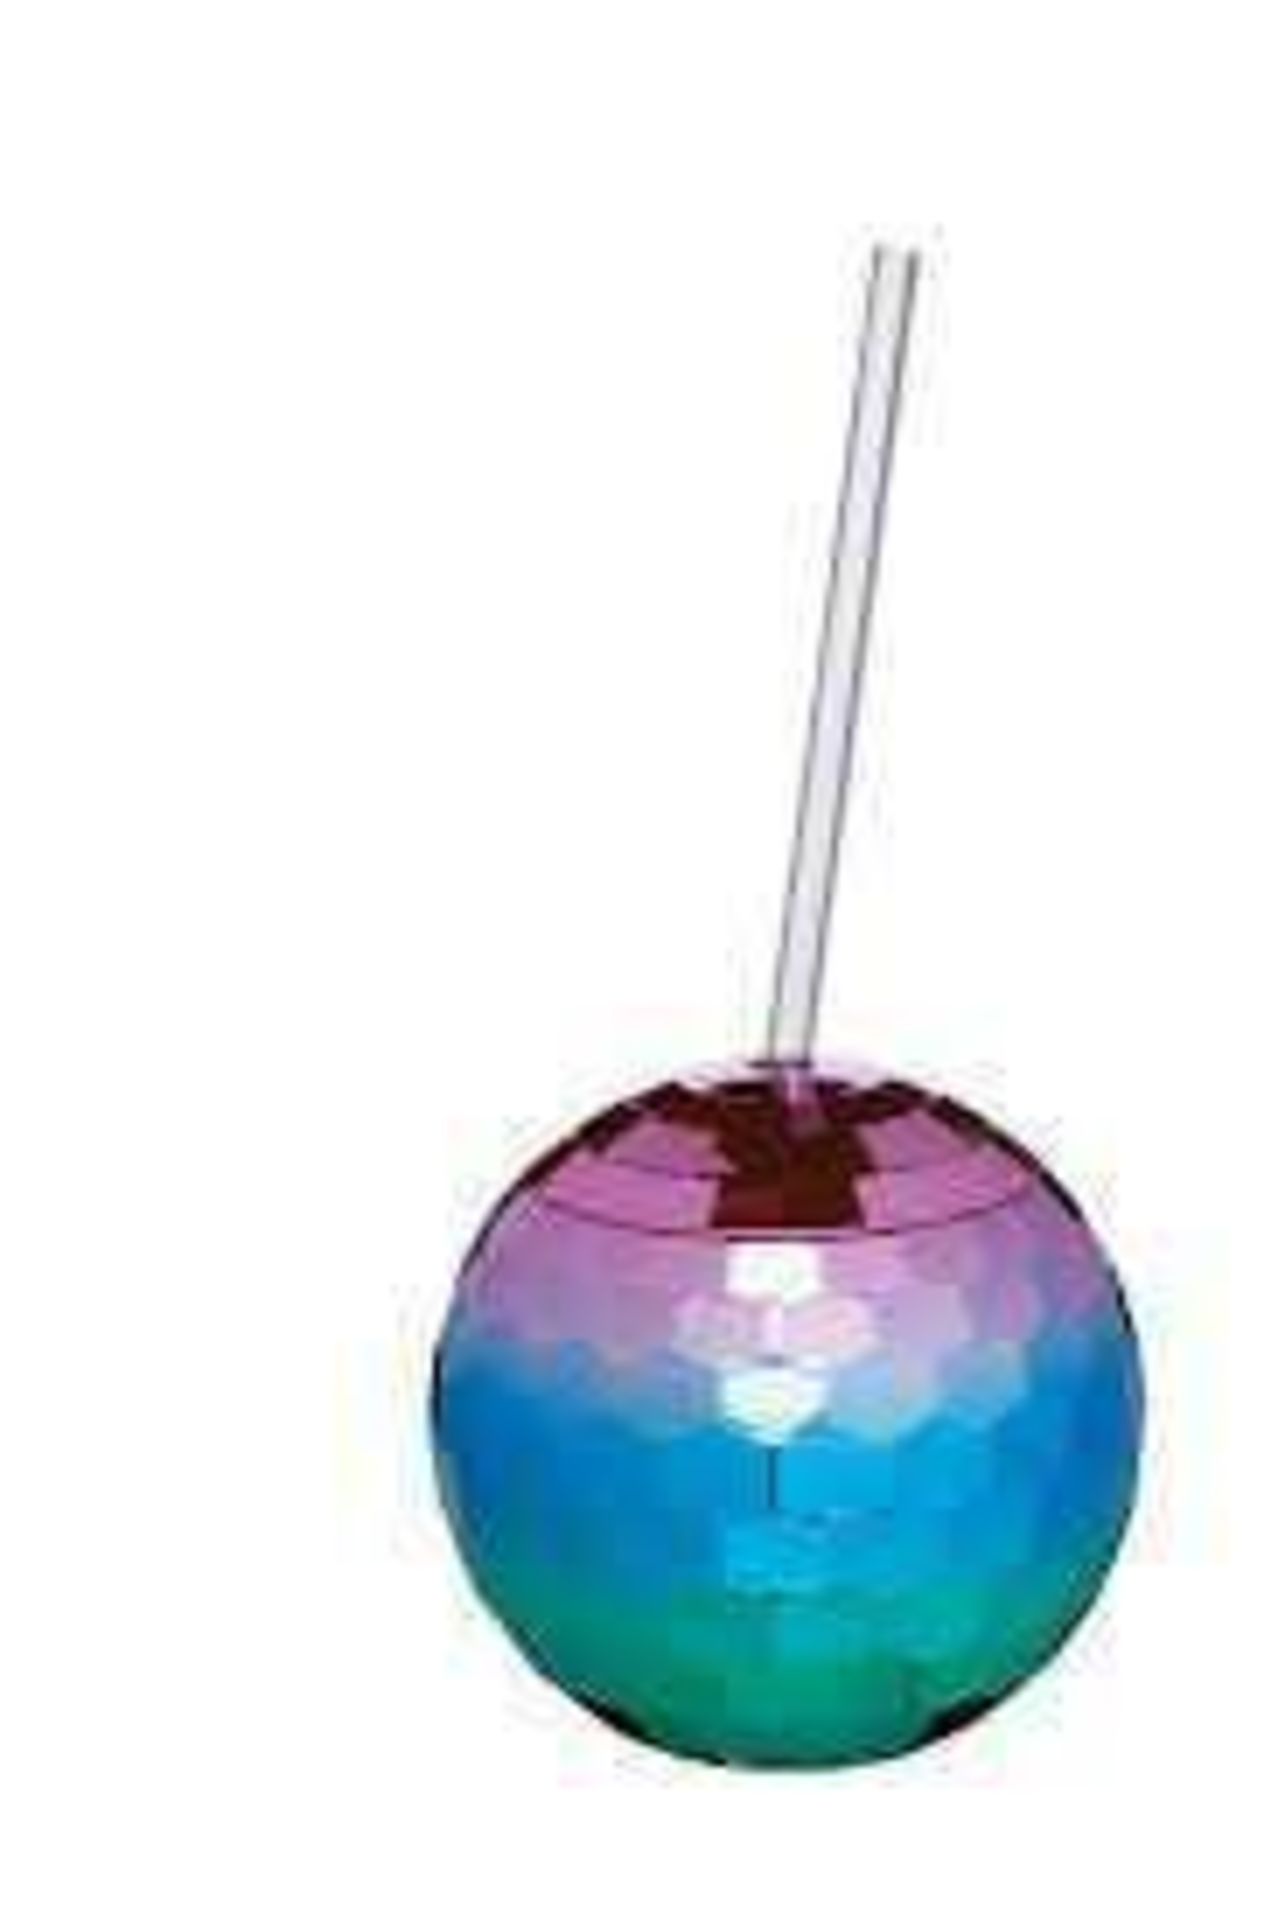 Combined RRP £130 Lot To Contain 6 Unboxed Disco Ball Drinking Cups With Straws, 2 Metal Ice Buckets